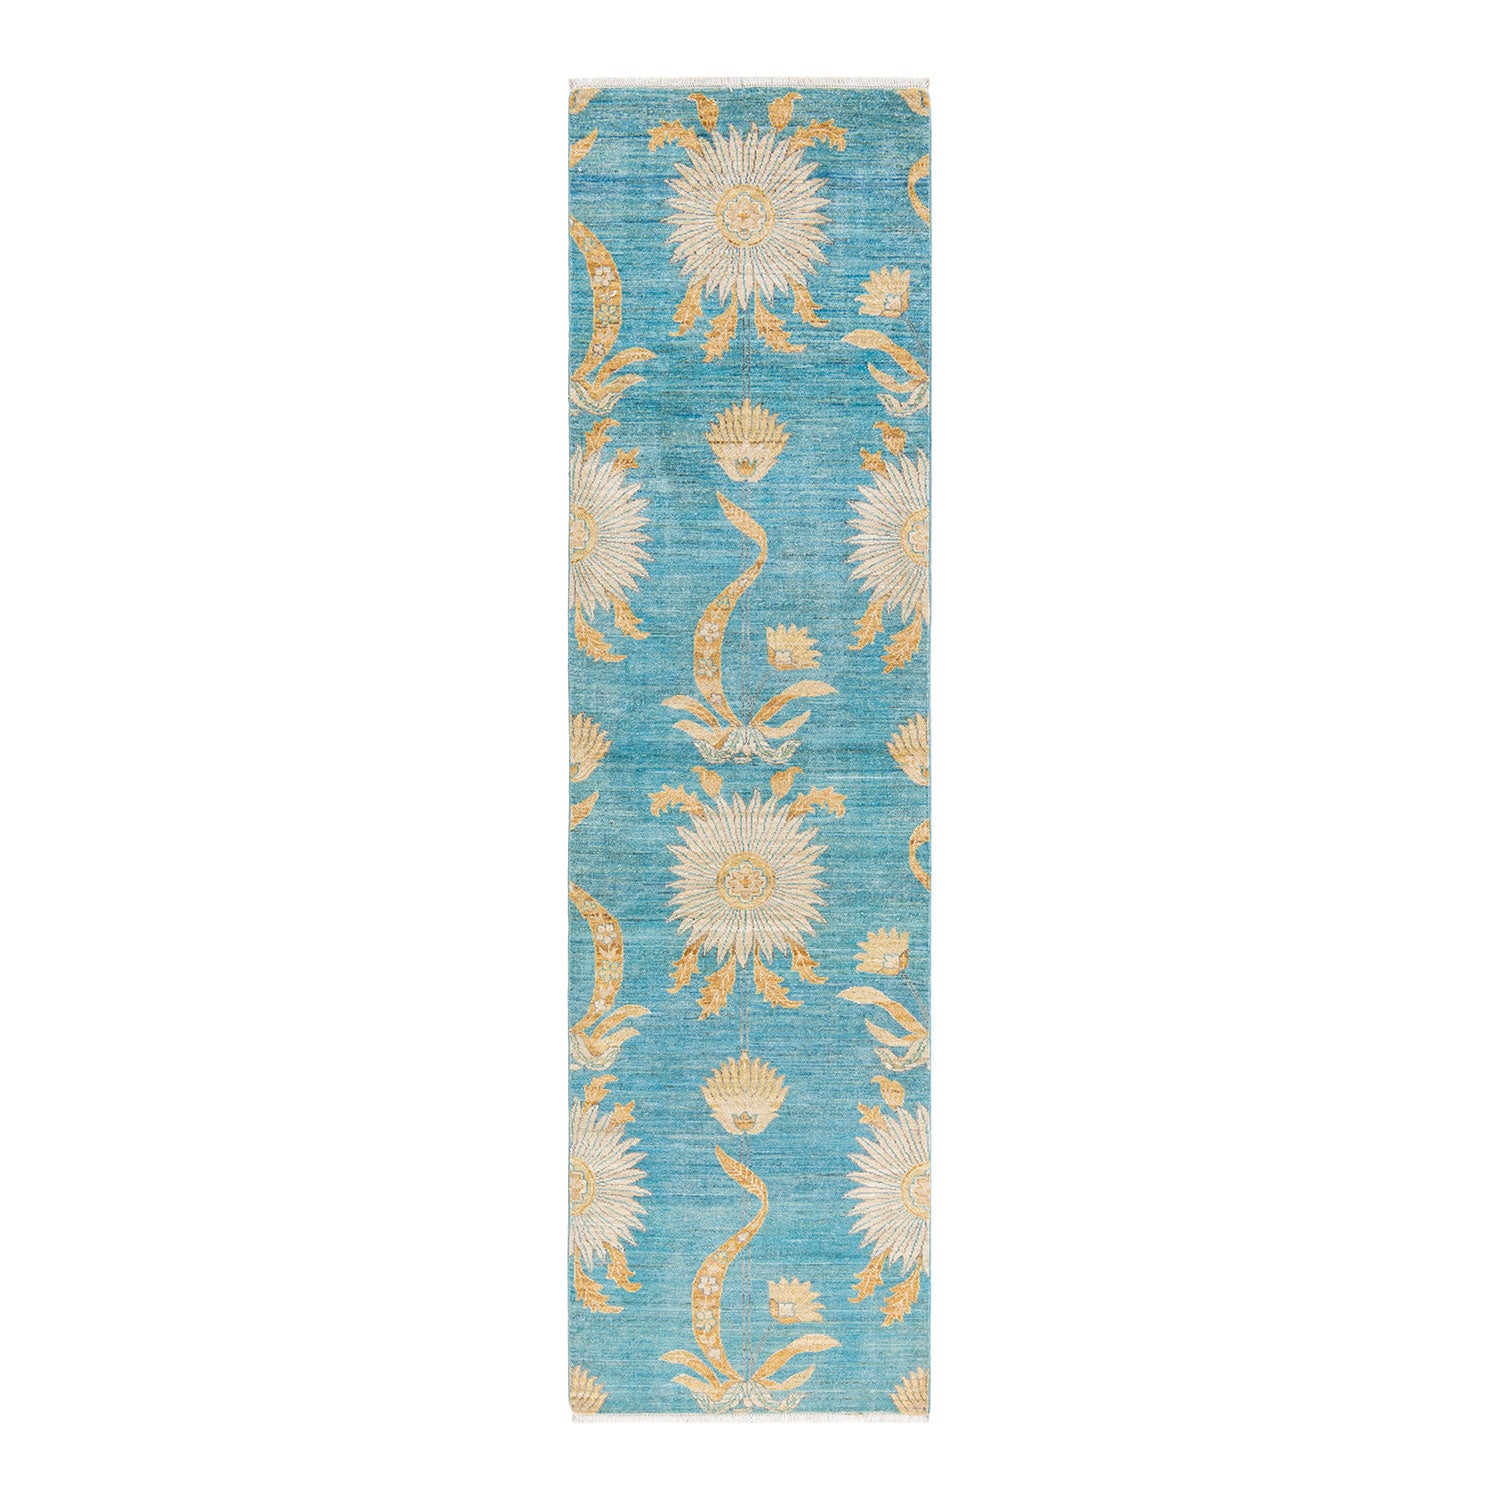 Long, narrow rug with light blue background and ornate pattern.